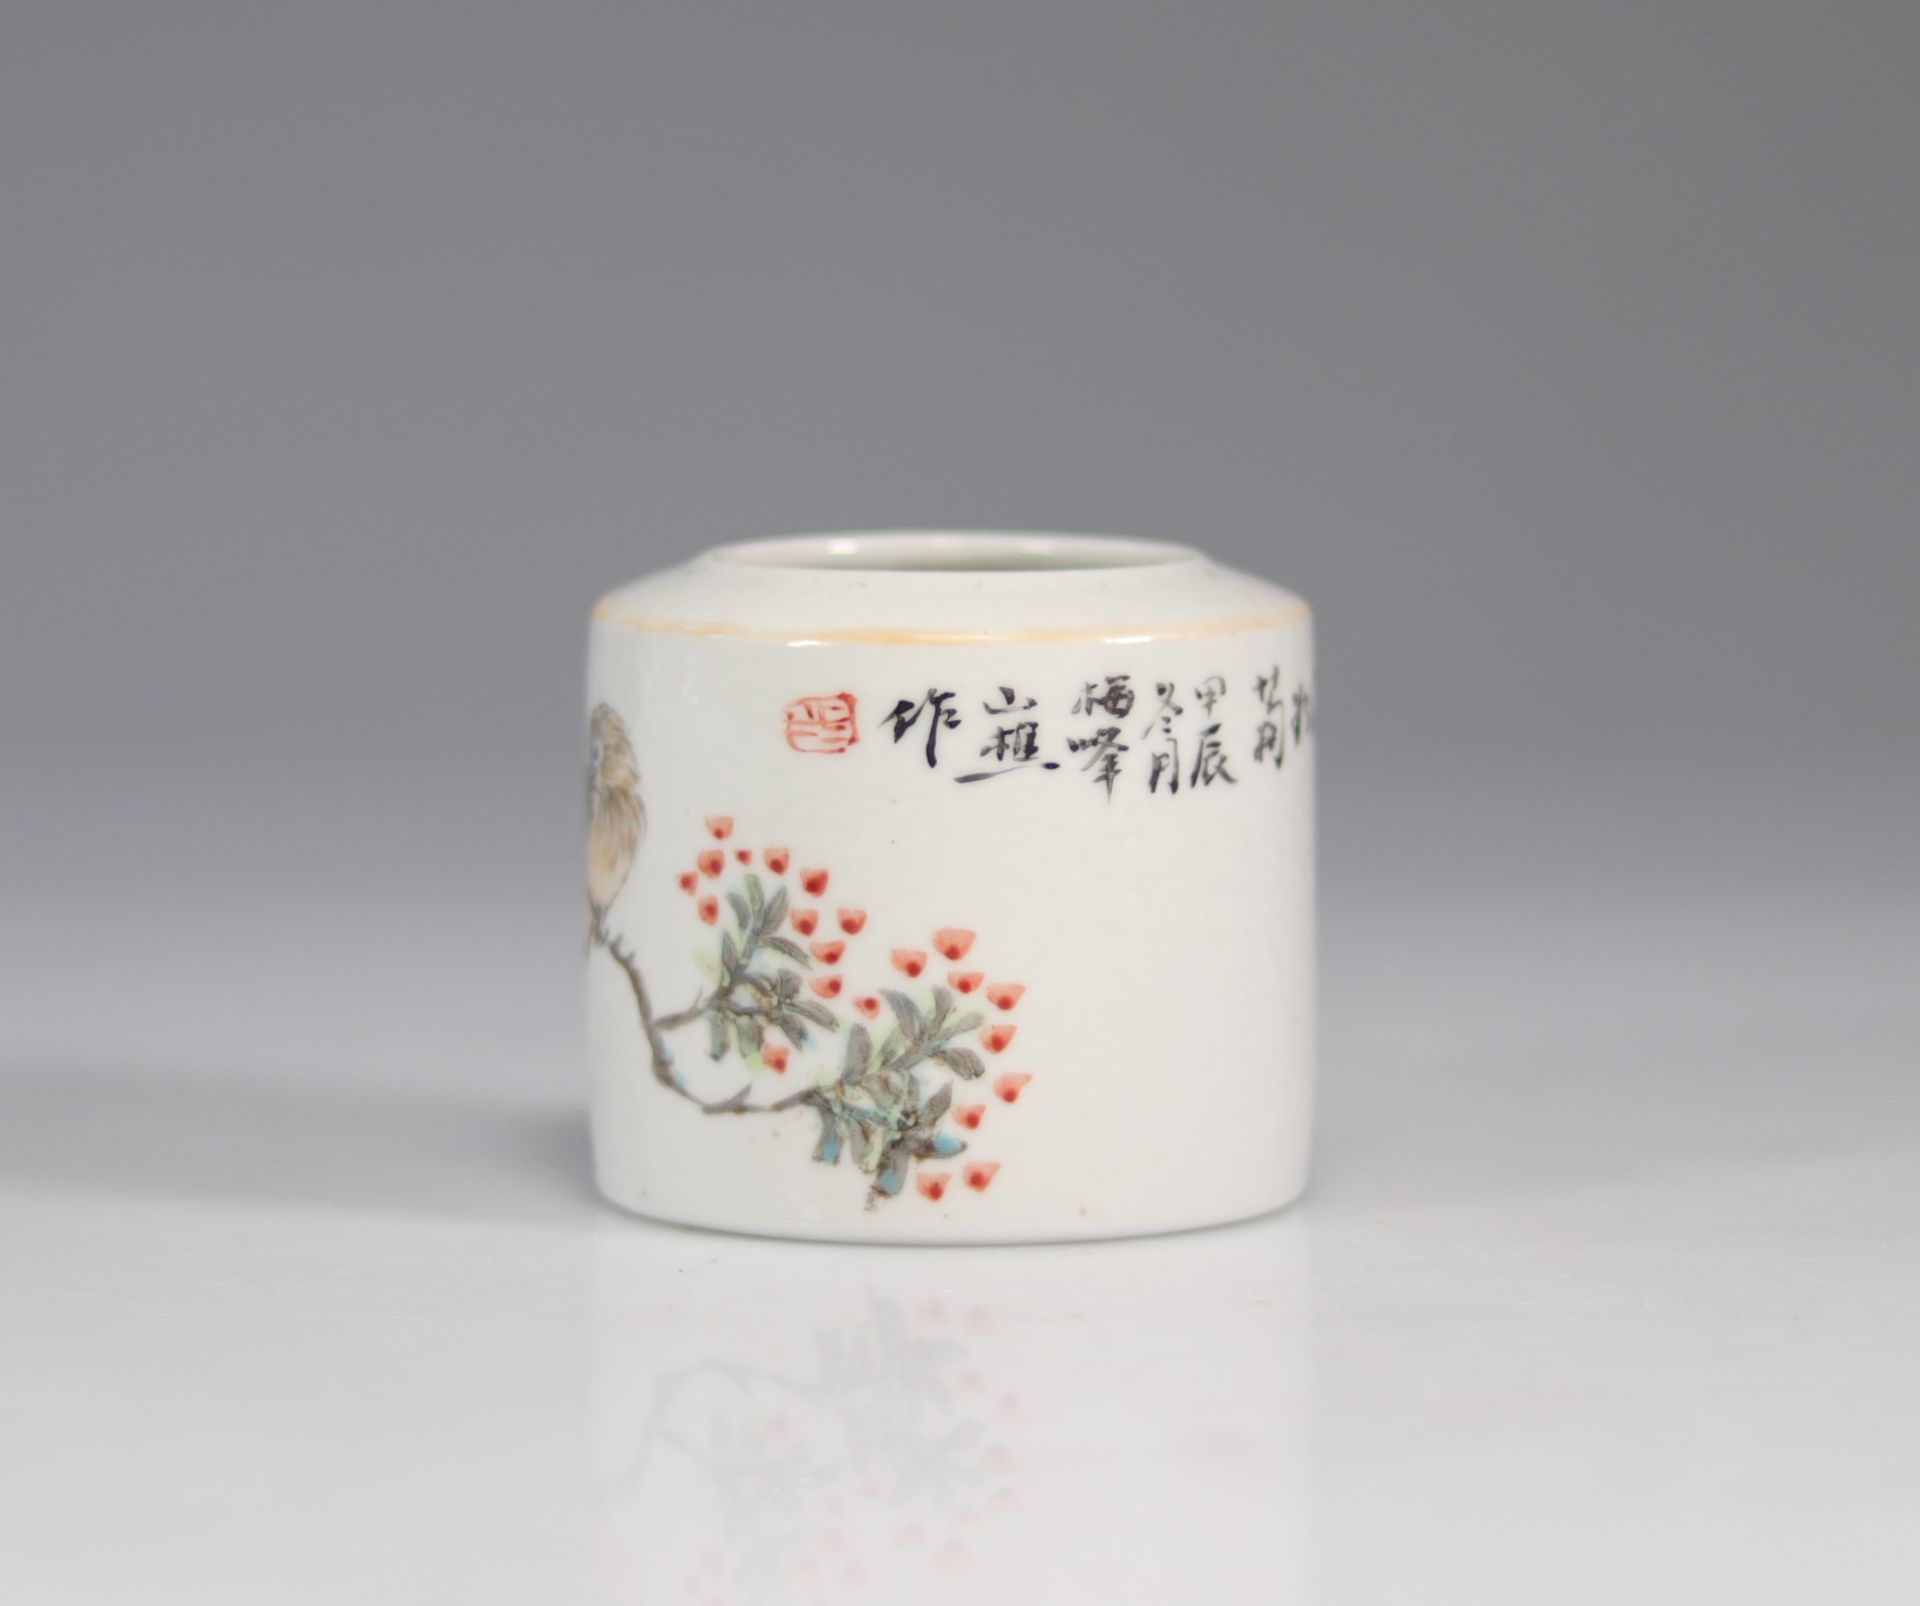 Brush holder in qianjiang cai porcelain with bird decor - Image 3 of 6